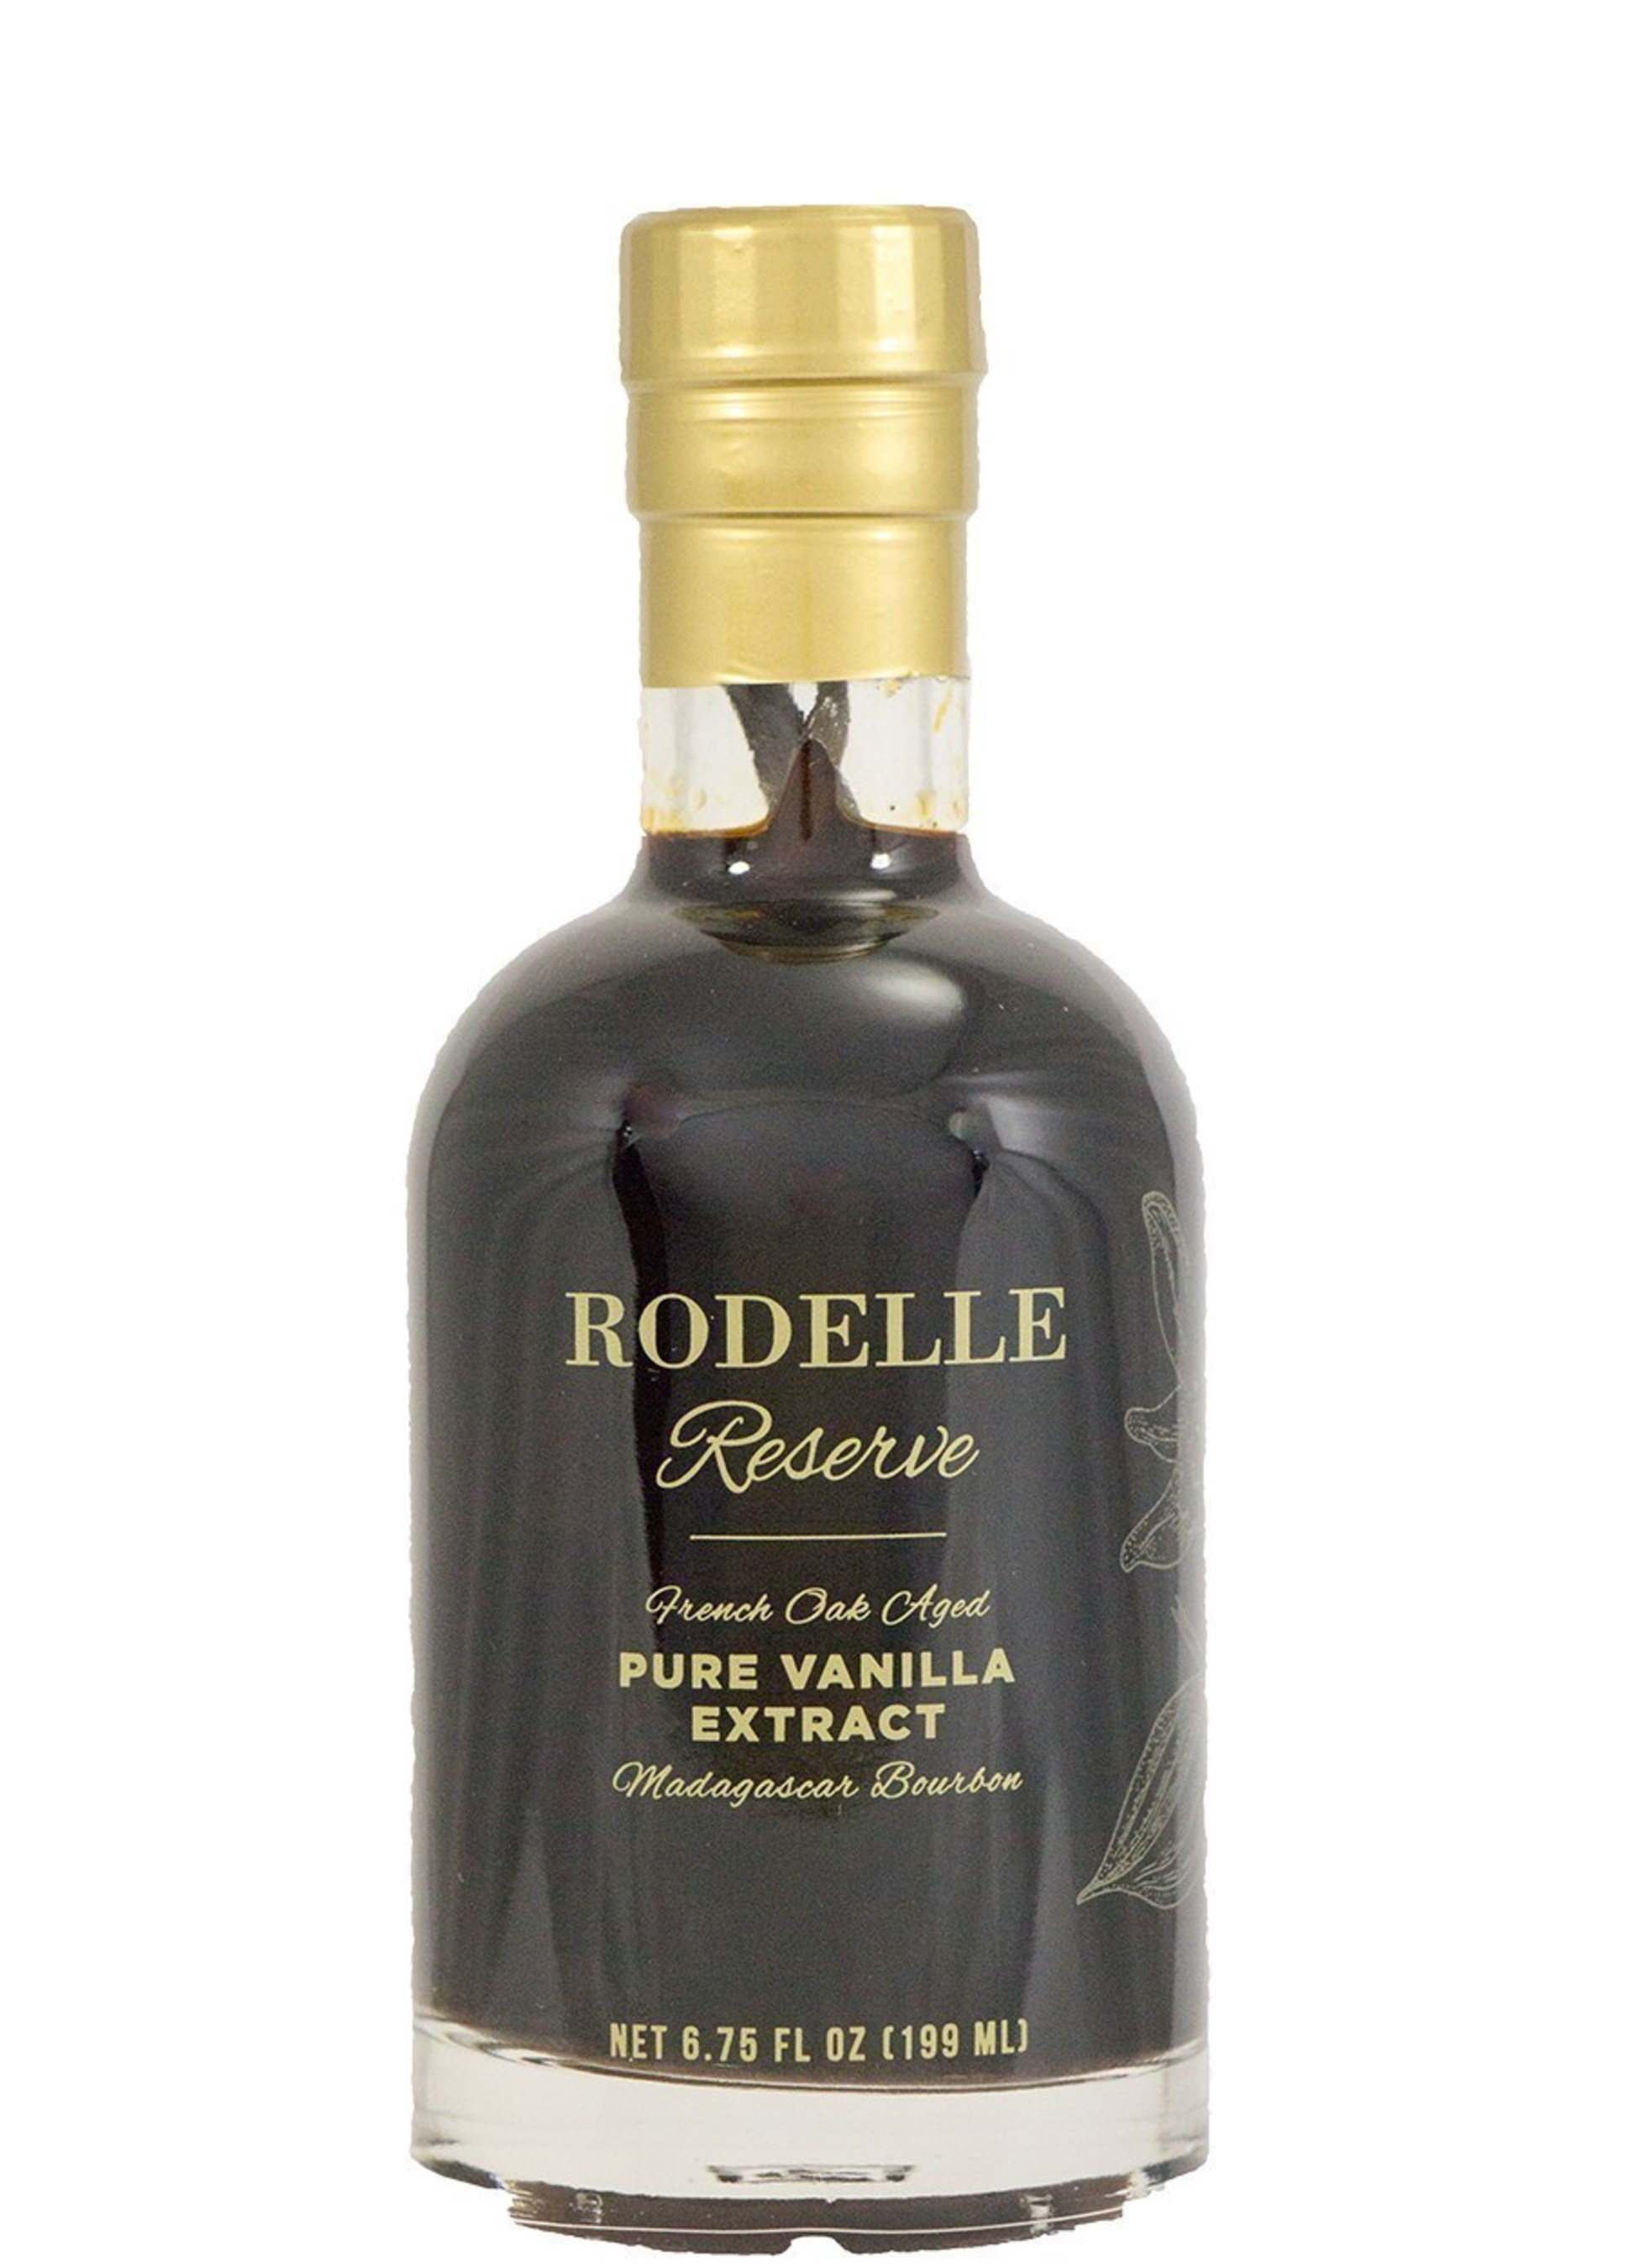 Rodelle Reserve French Oak Aged Madagascar Bourbon Pure Vanilla Extract is a small-batch, gourmet vanilla extract for savvy consumers. Eighty years in the making, Rodelle Reserve is the most complex and carefully crafted vanilla extract available. With only 1600 units, Rodelle Reserve offers a small-batch, aged vanilla extract that will elevate any baking occasion. Rodelle Reserve is the best vanilla extract available with the purest of ingredients and a vintage feel that honors the heritage of the world's favorite flavor.